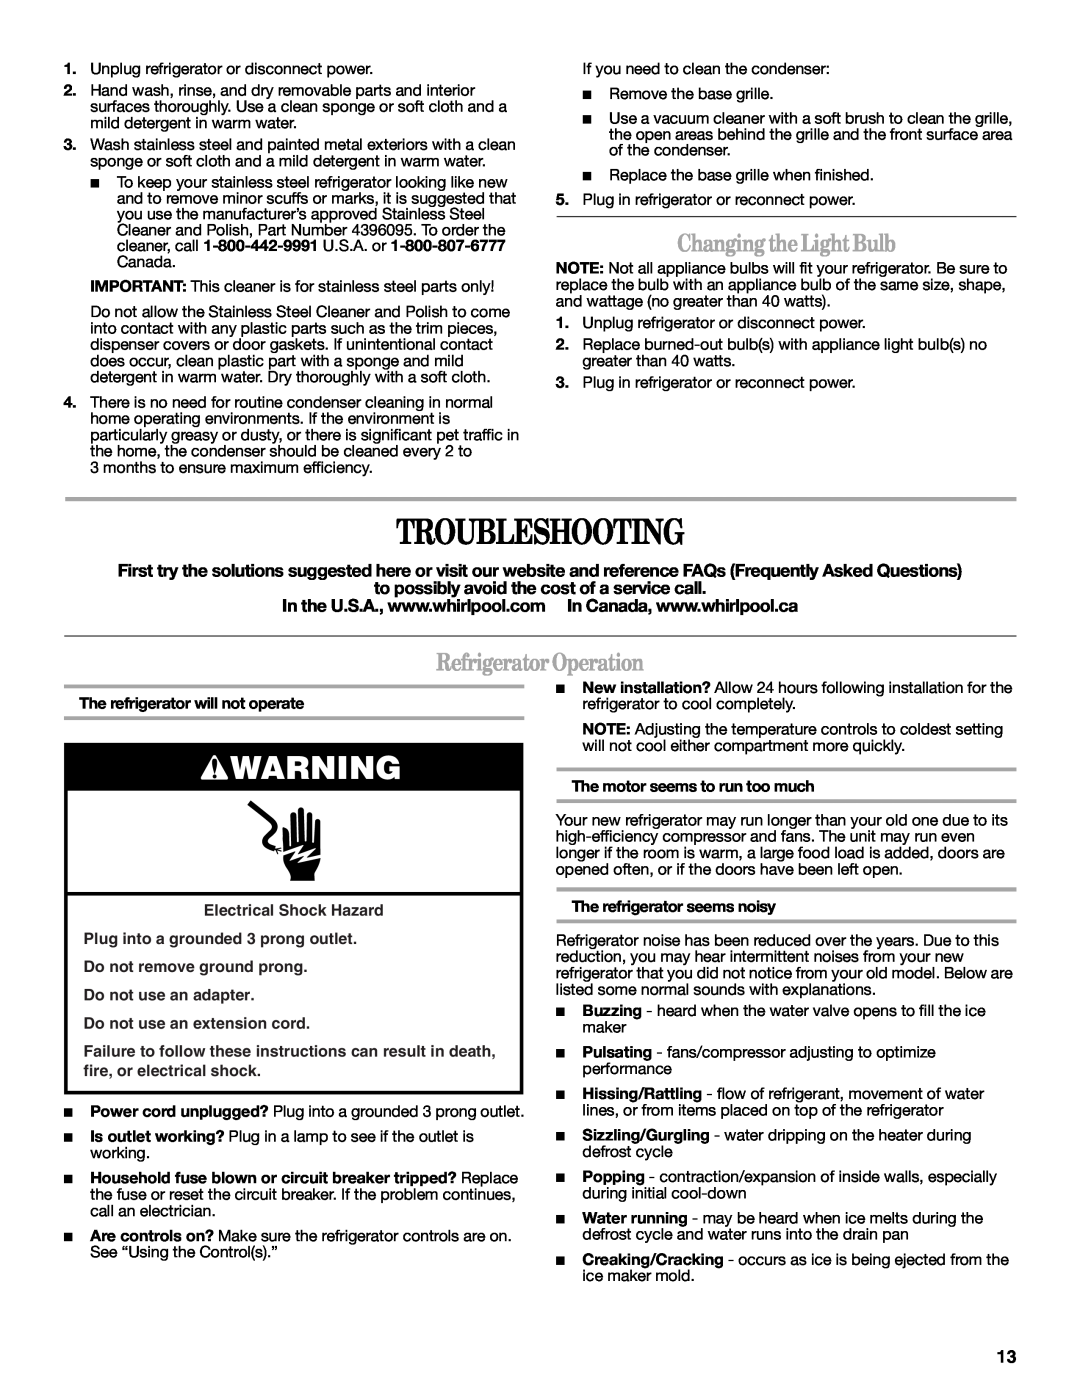 Whirlpool W10245525A, W10226405A installation instructions Troubleshooting, Changing the Light Bulb, Refrigerator Operation 